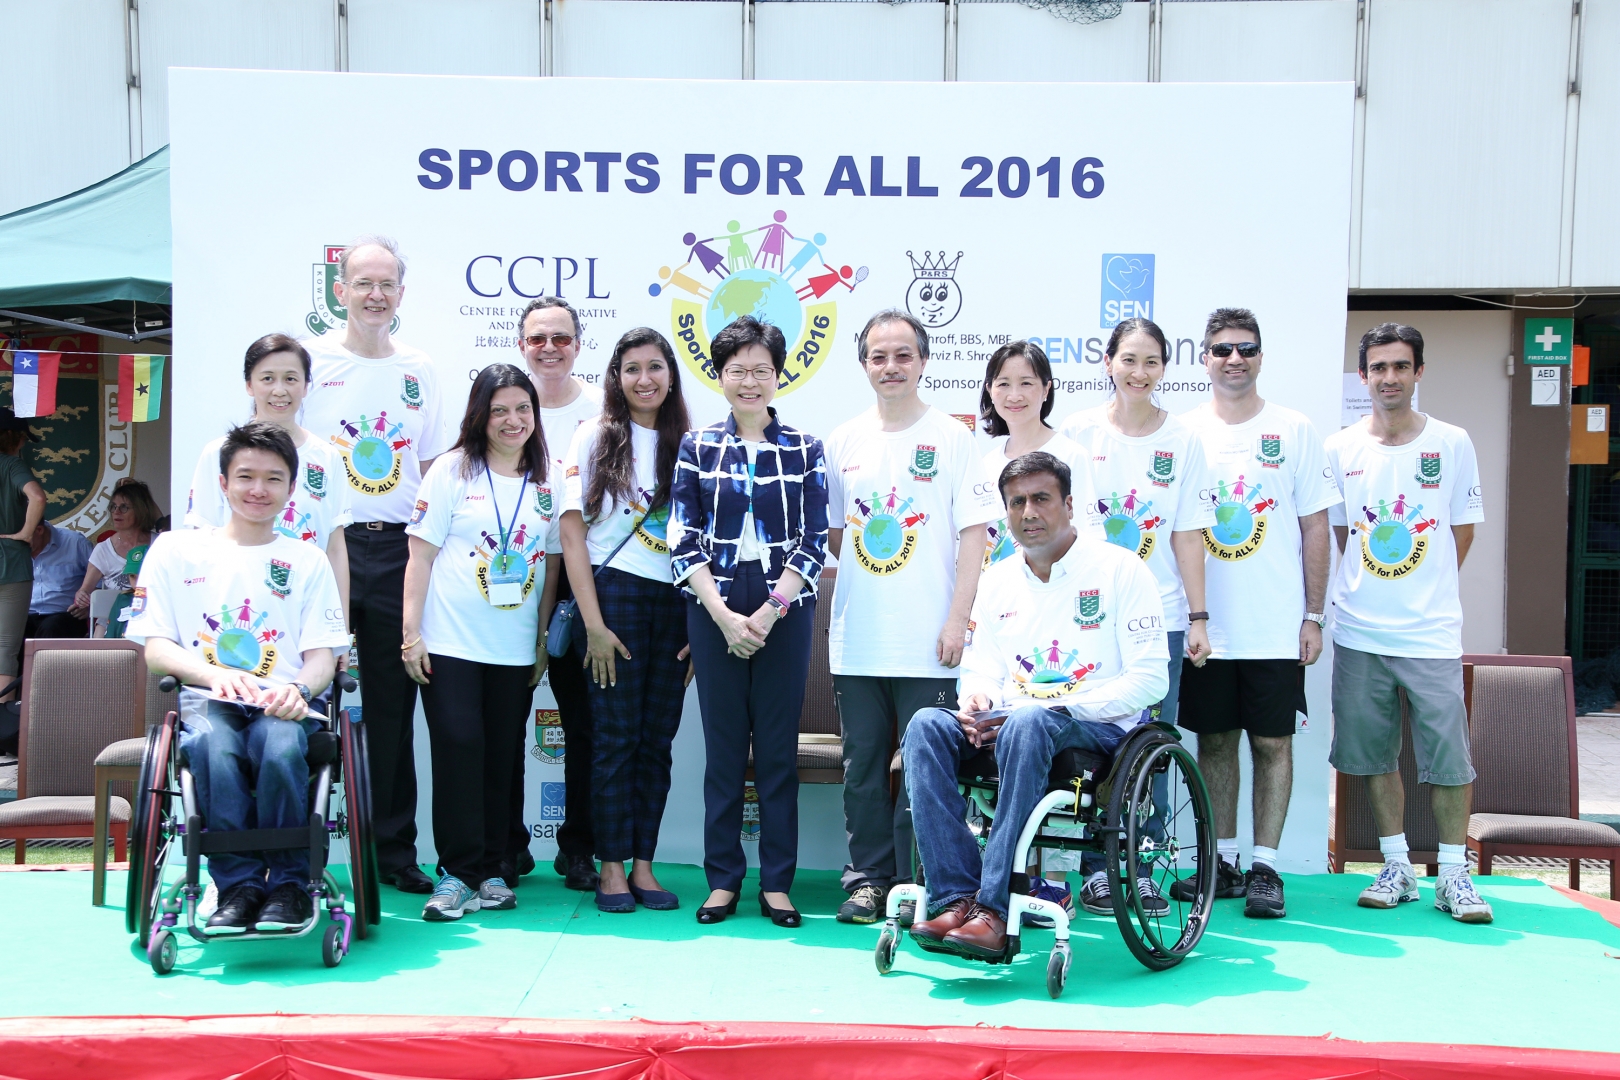 Sports for All 2016 - Children's sports day